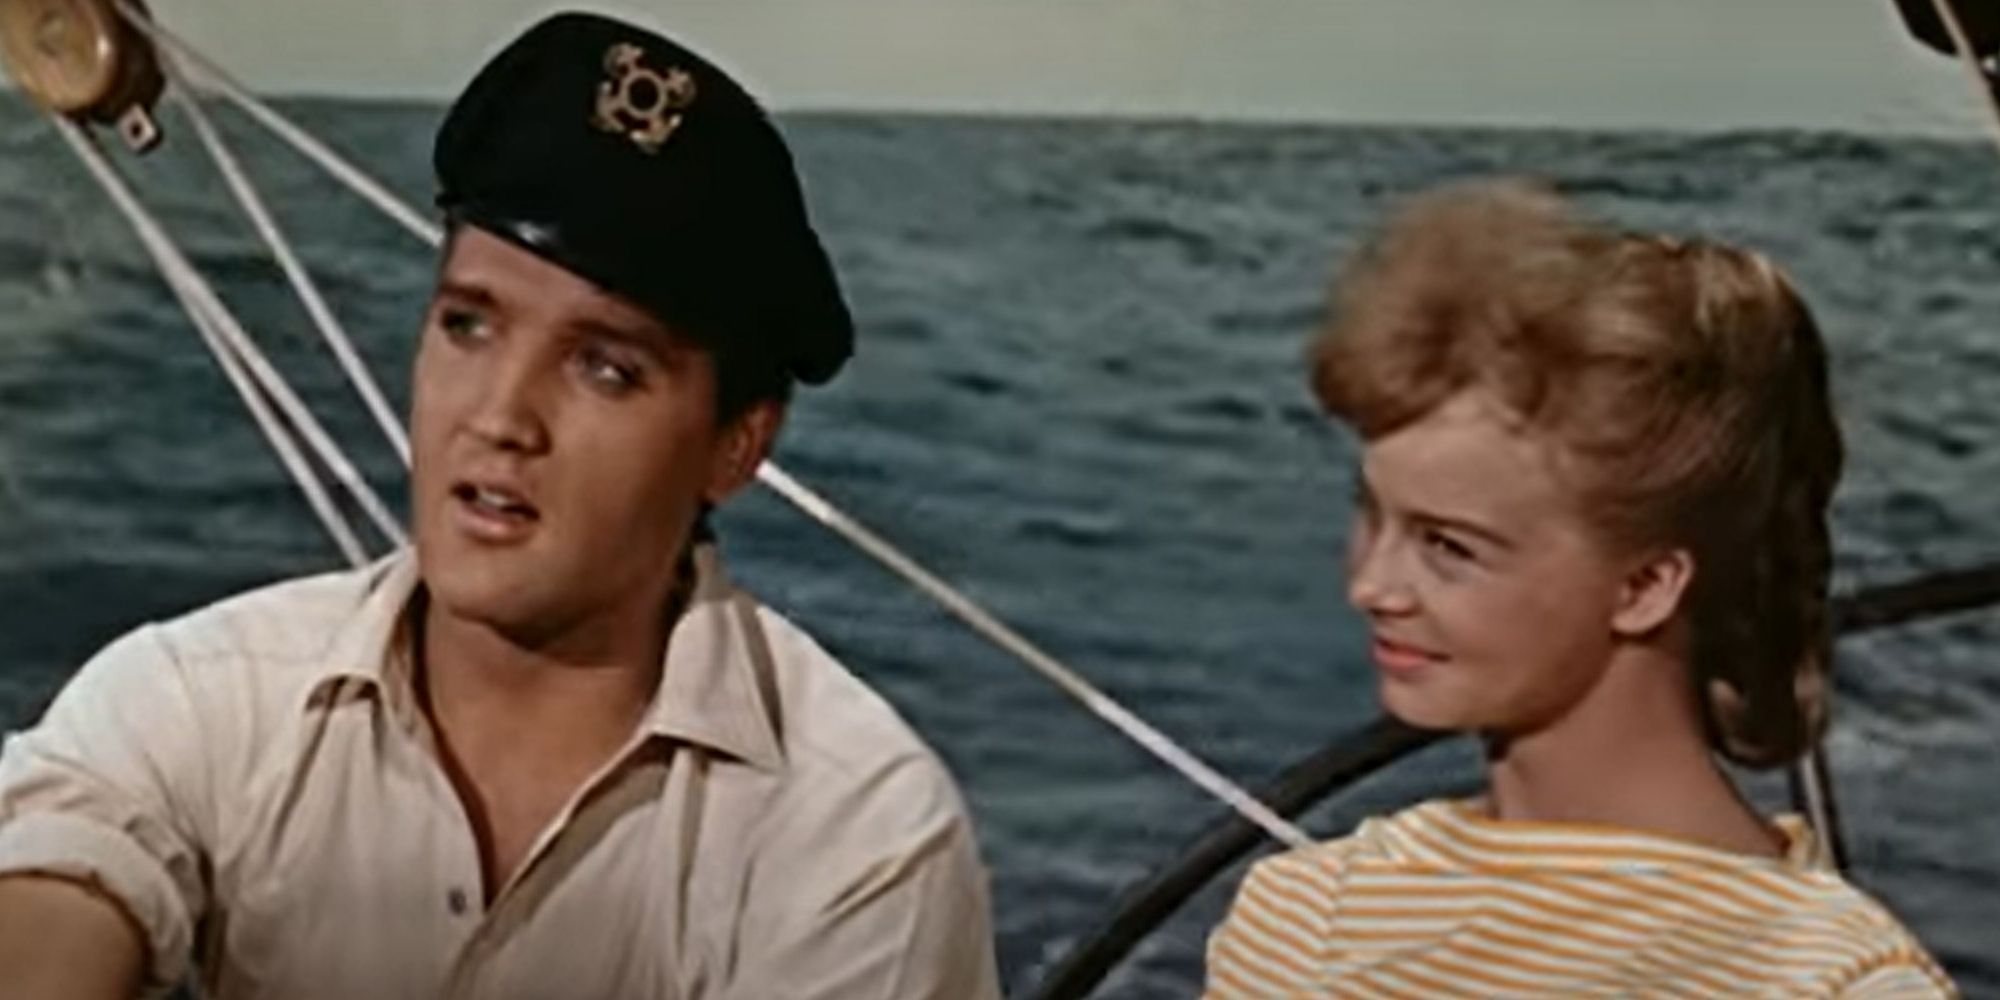 Elvis (as Ross) and his lover take a romantic boat ride in "Girls! Girls! Girls!"